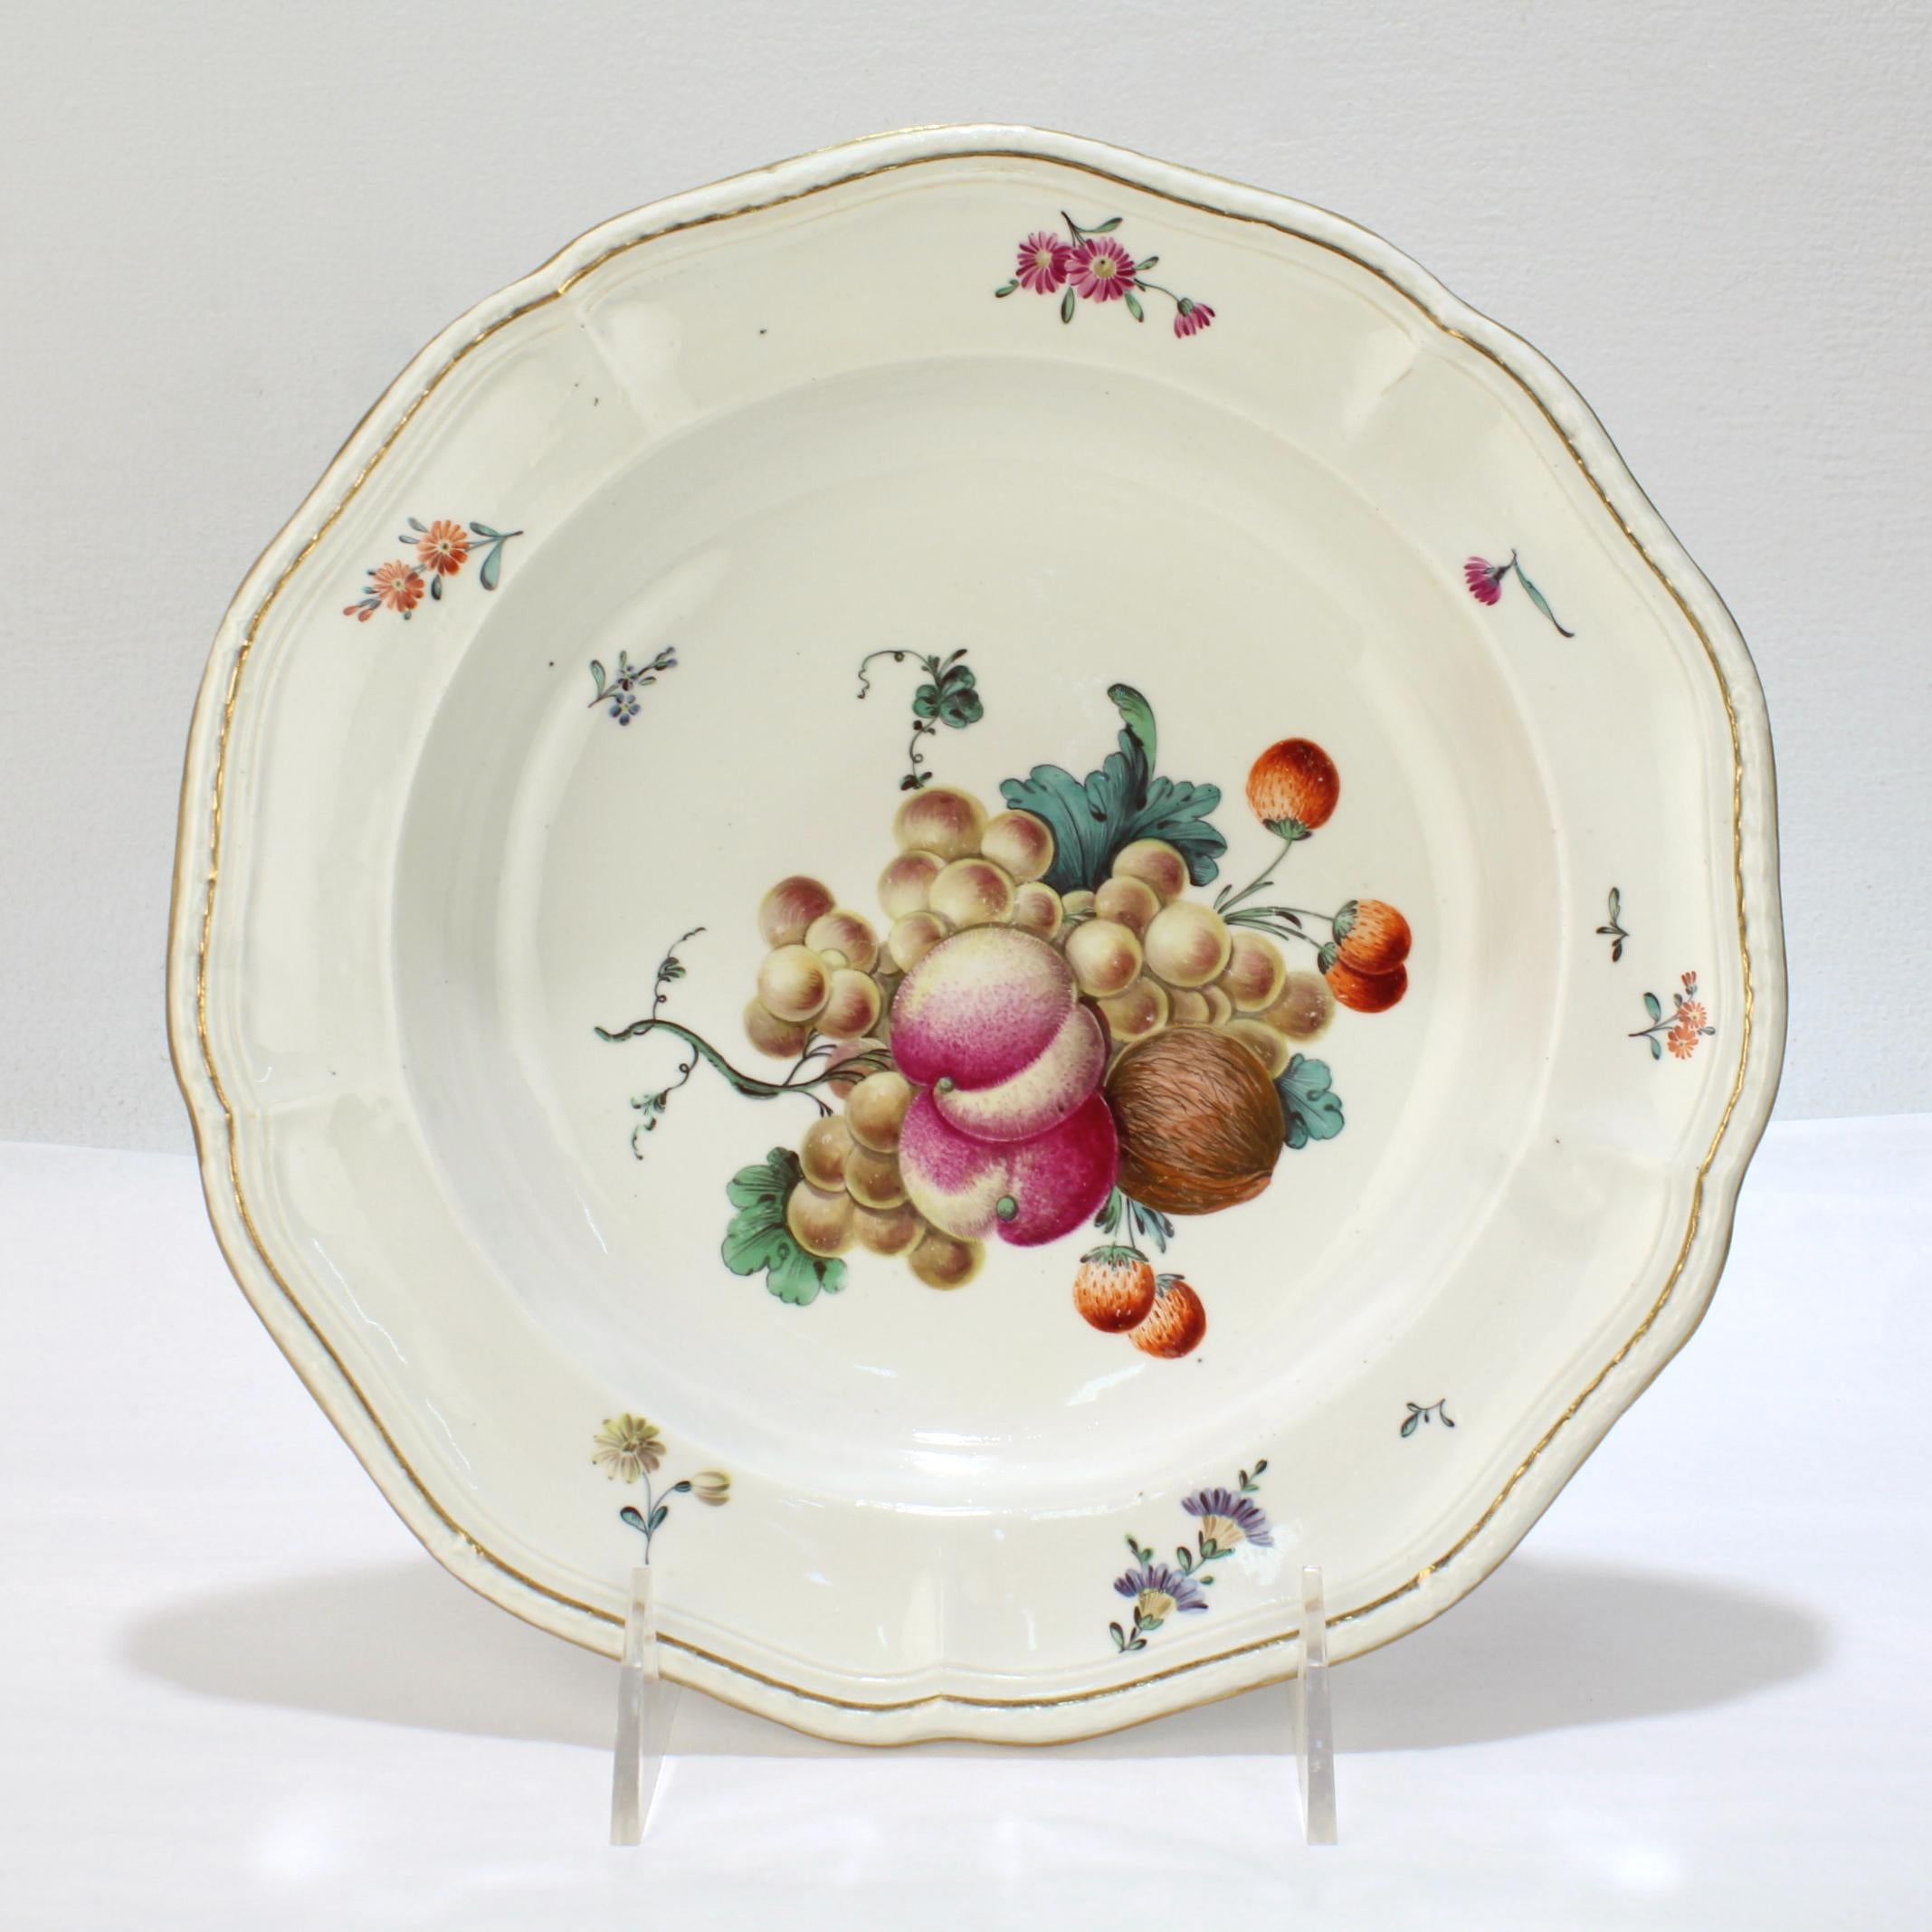 A very fine antique 18th century porcelain bowl.

By Frankenthal during the Carl Theodor period.

With a group of polychrome enamel decorated fruit and nuts to the bowl, floral sprays to the border, and a gilt edged, molded rim.

Simply a